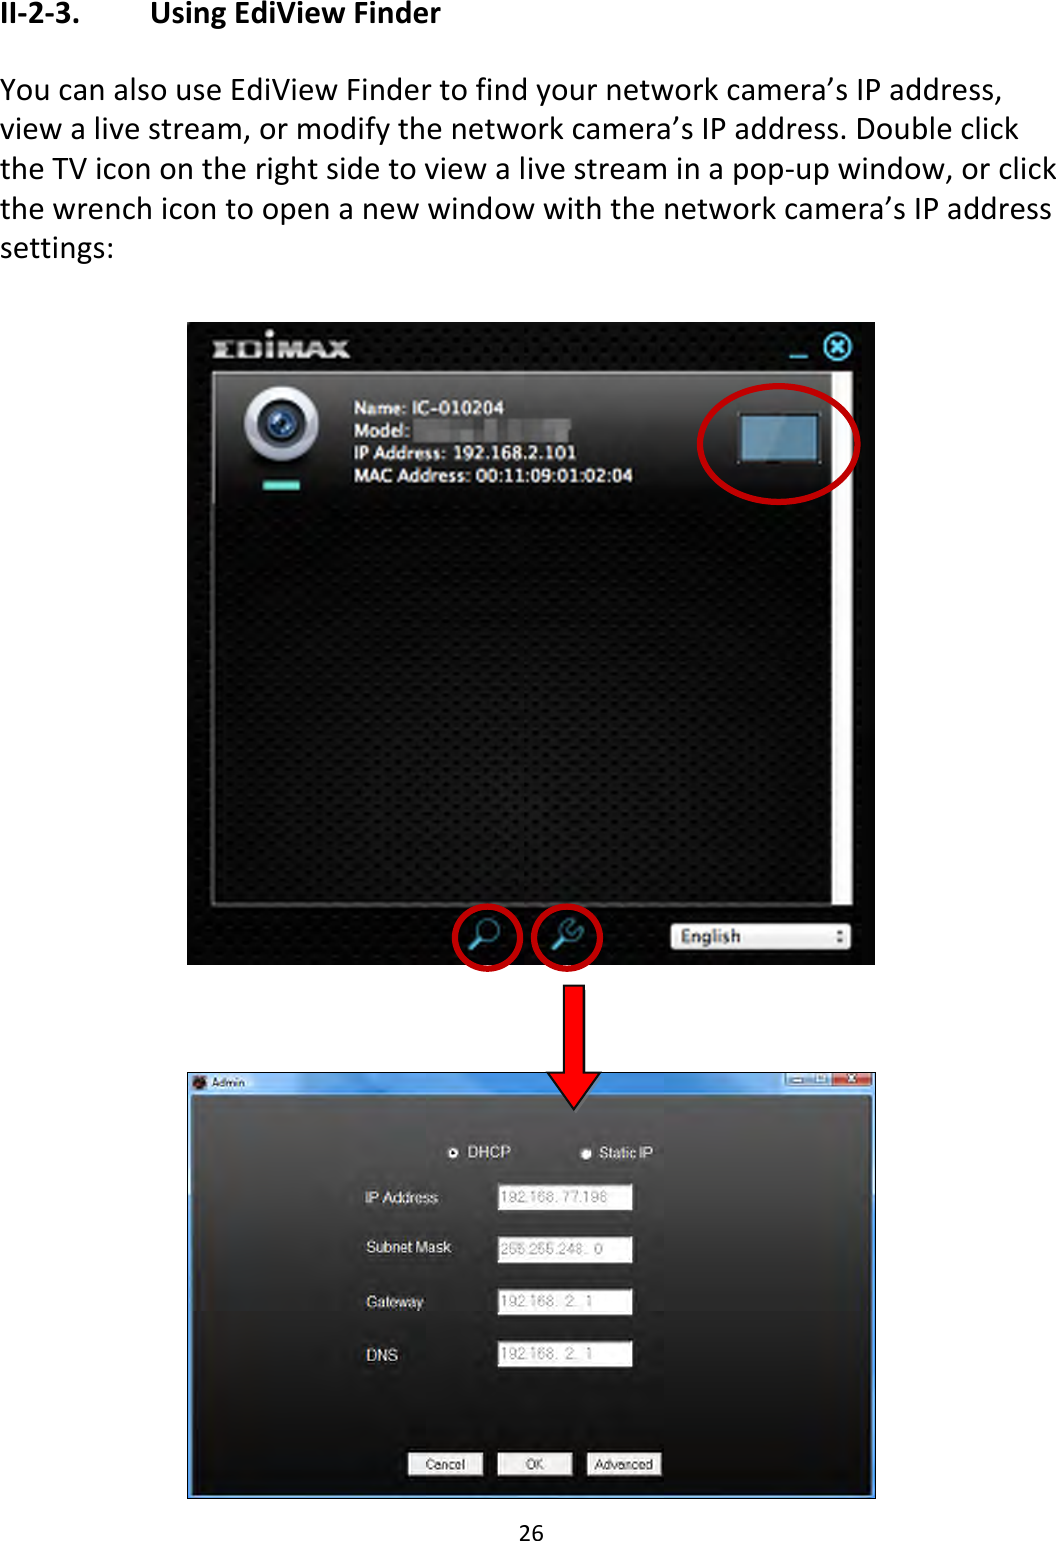 26  II-2-3.    Using EdiView Finder  You can also use EdiView Finder to find your network camera’s IP address, view a live stream, or modify the network camera’s IP address. Double click the TV icon on the right side to view a live stream in a pop-up window, or click the wrench icon to open a new window with the network camera’s IP address settings:      